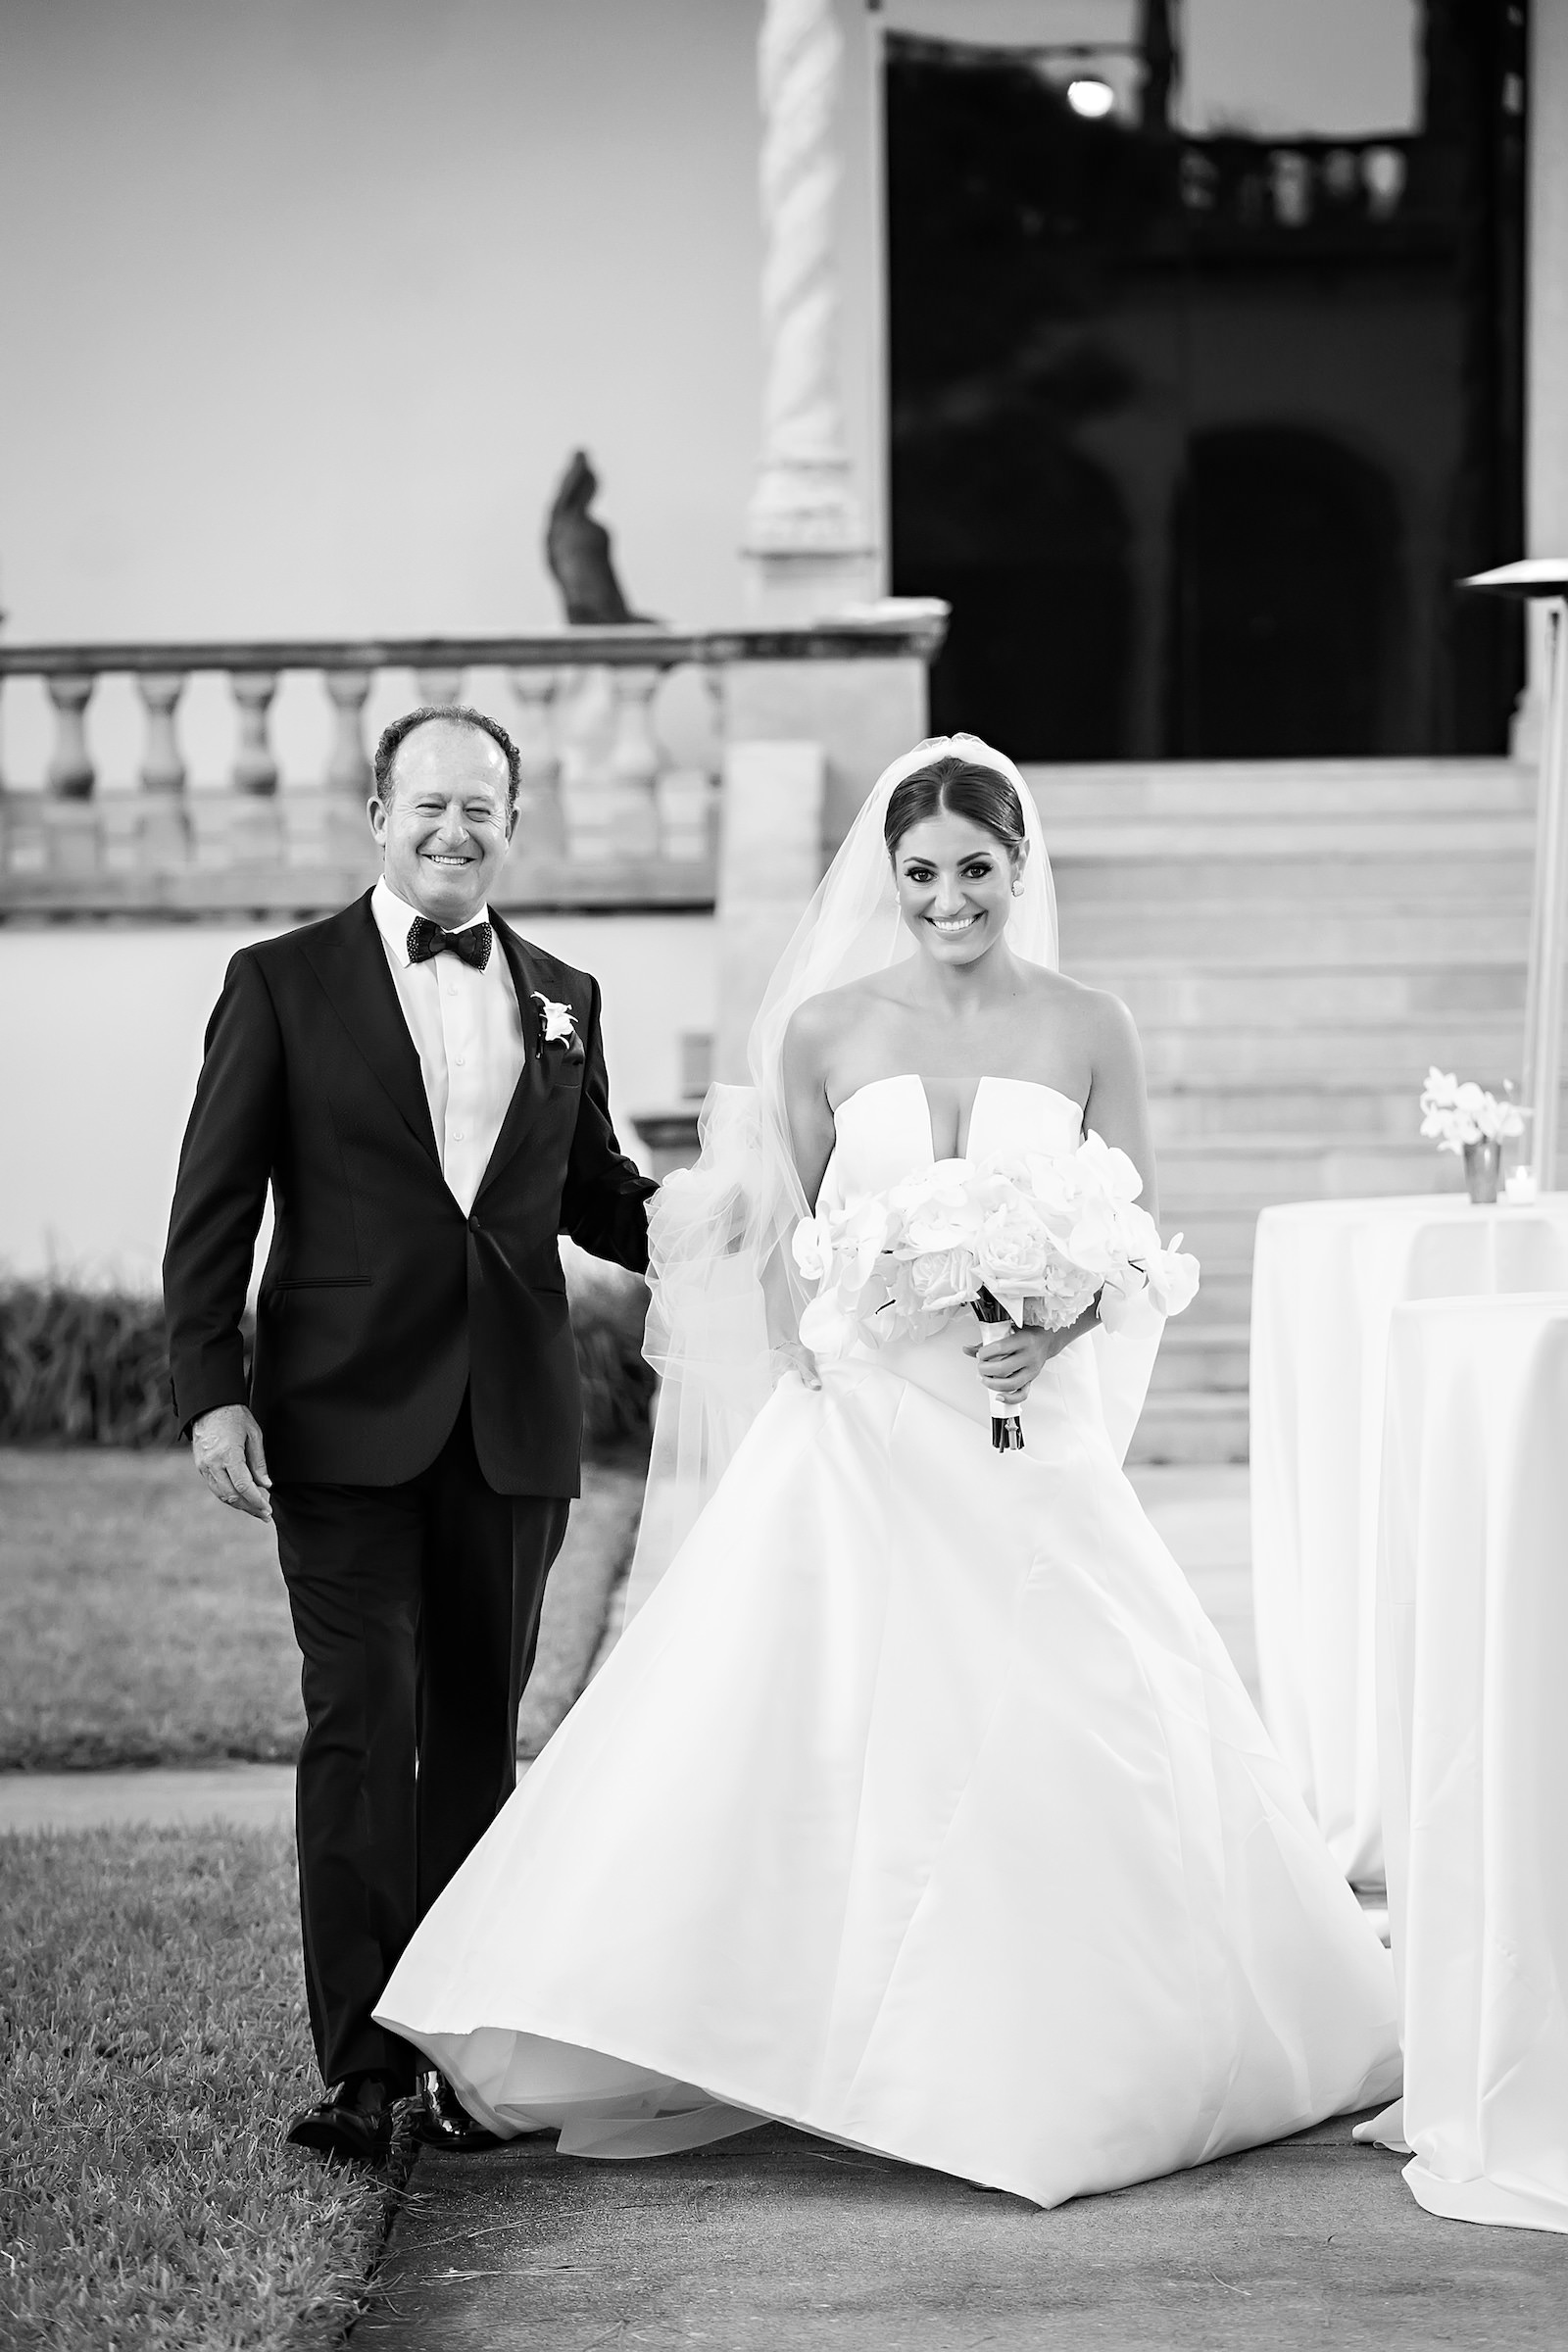 Luxurious Modern Chic Bride and Father Walking Down the Wedding Ceremony Aisle, Black and White Portrait | Tampa Bay Wedding Photographer Limelight Photography